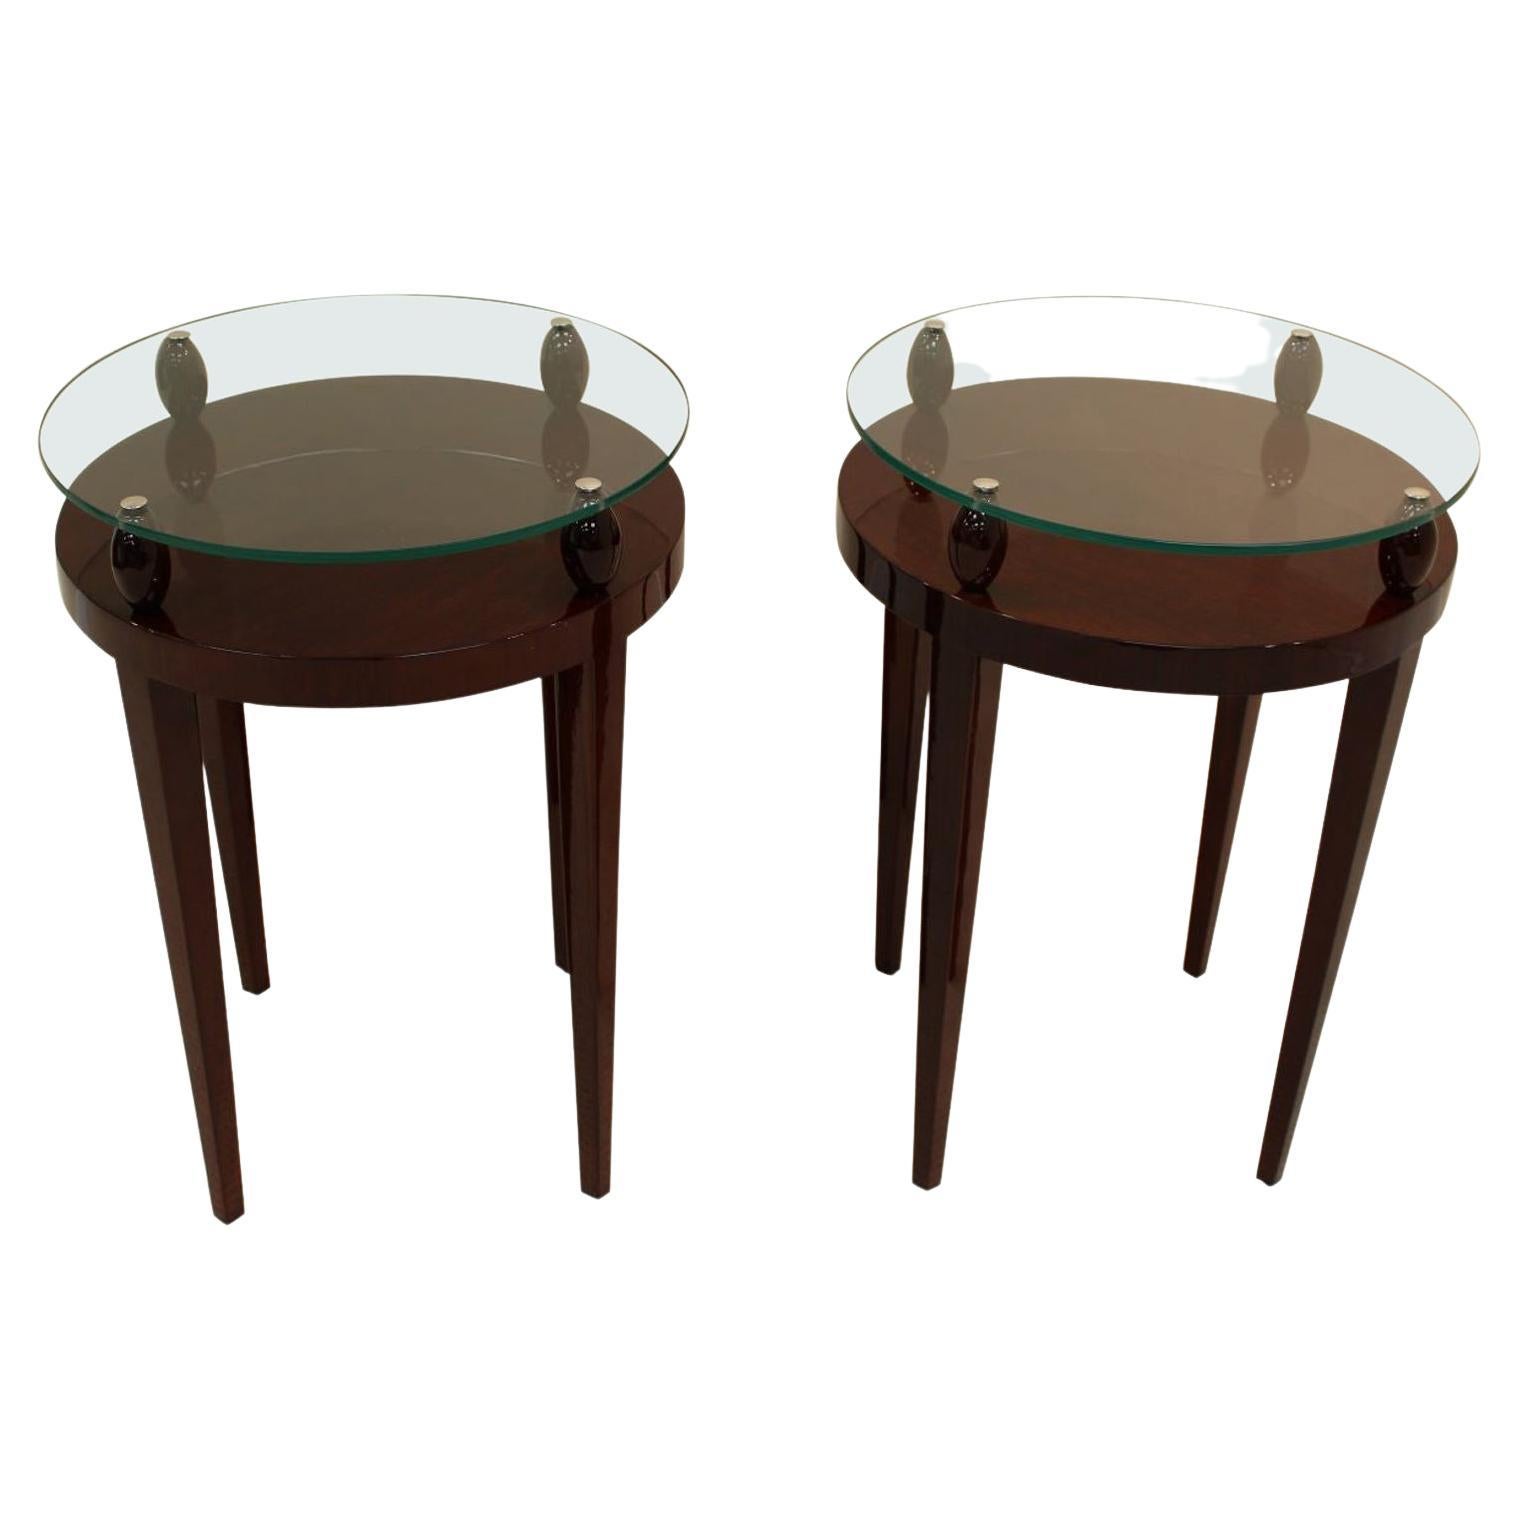 Stunning Pair of Round  Art Deco Glass-Top Side Tables In Walnut Circa 1940's